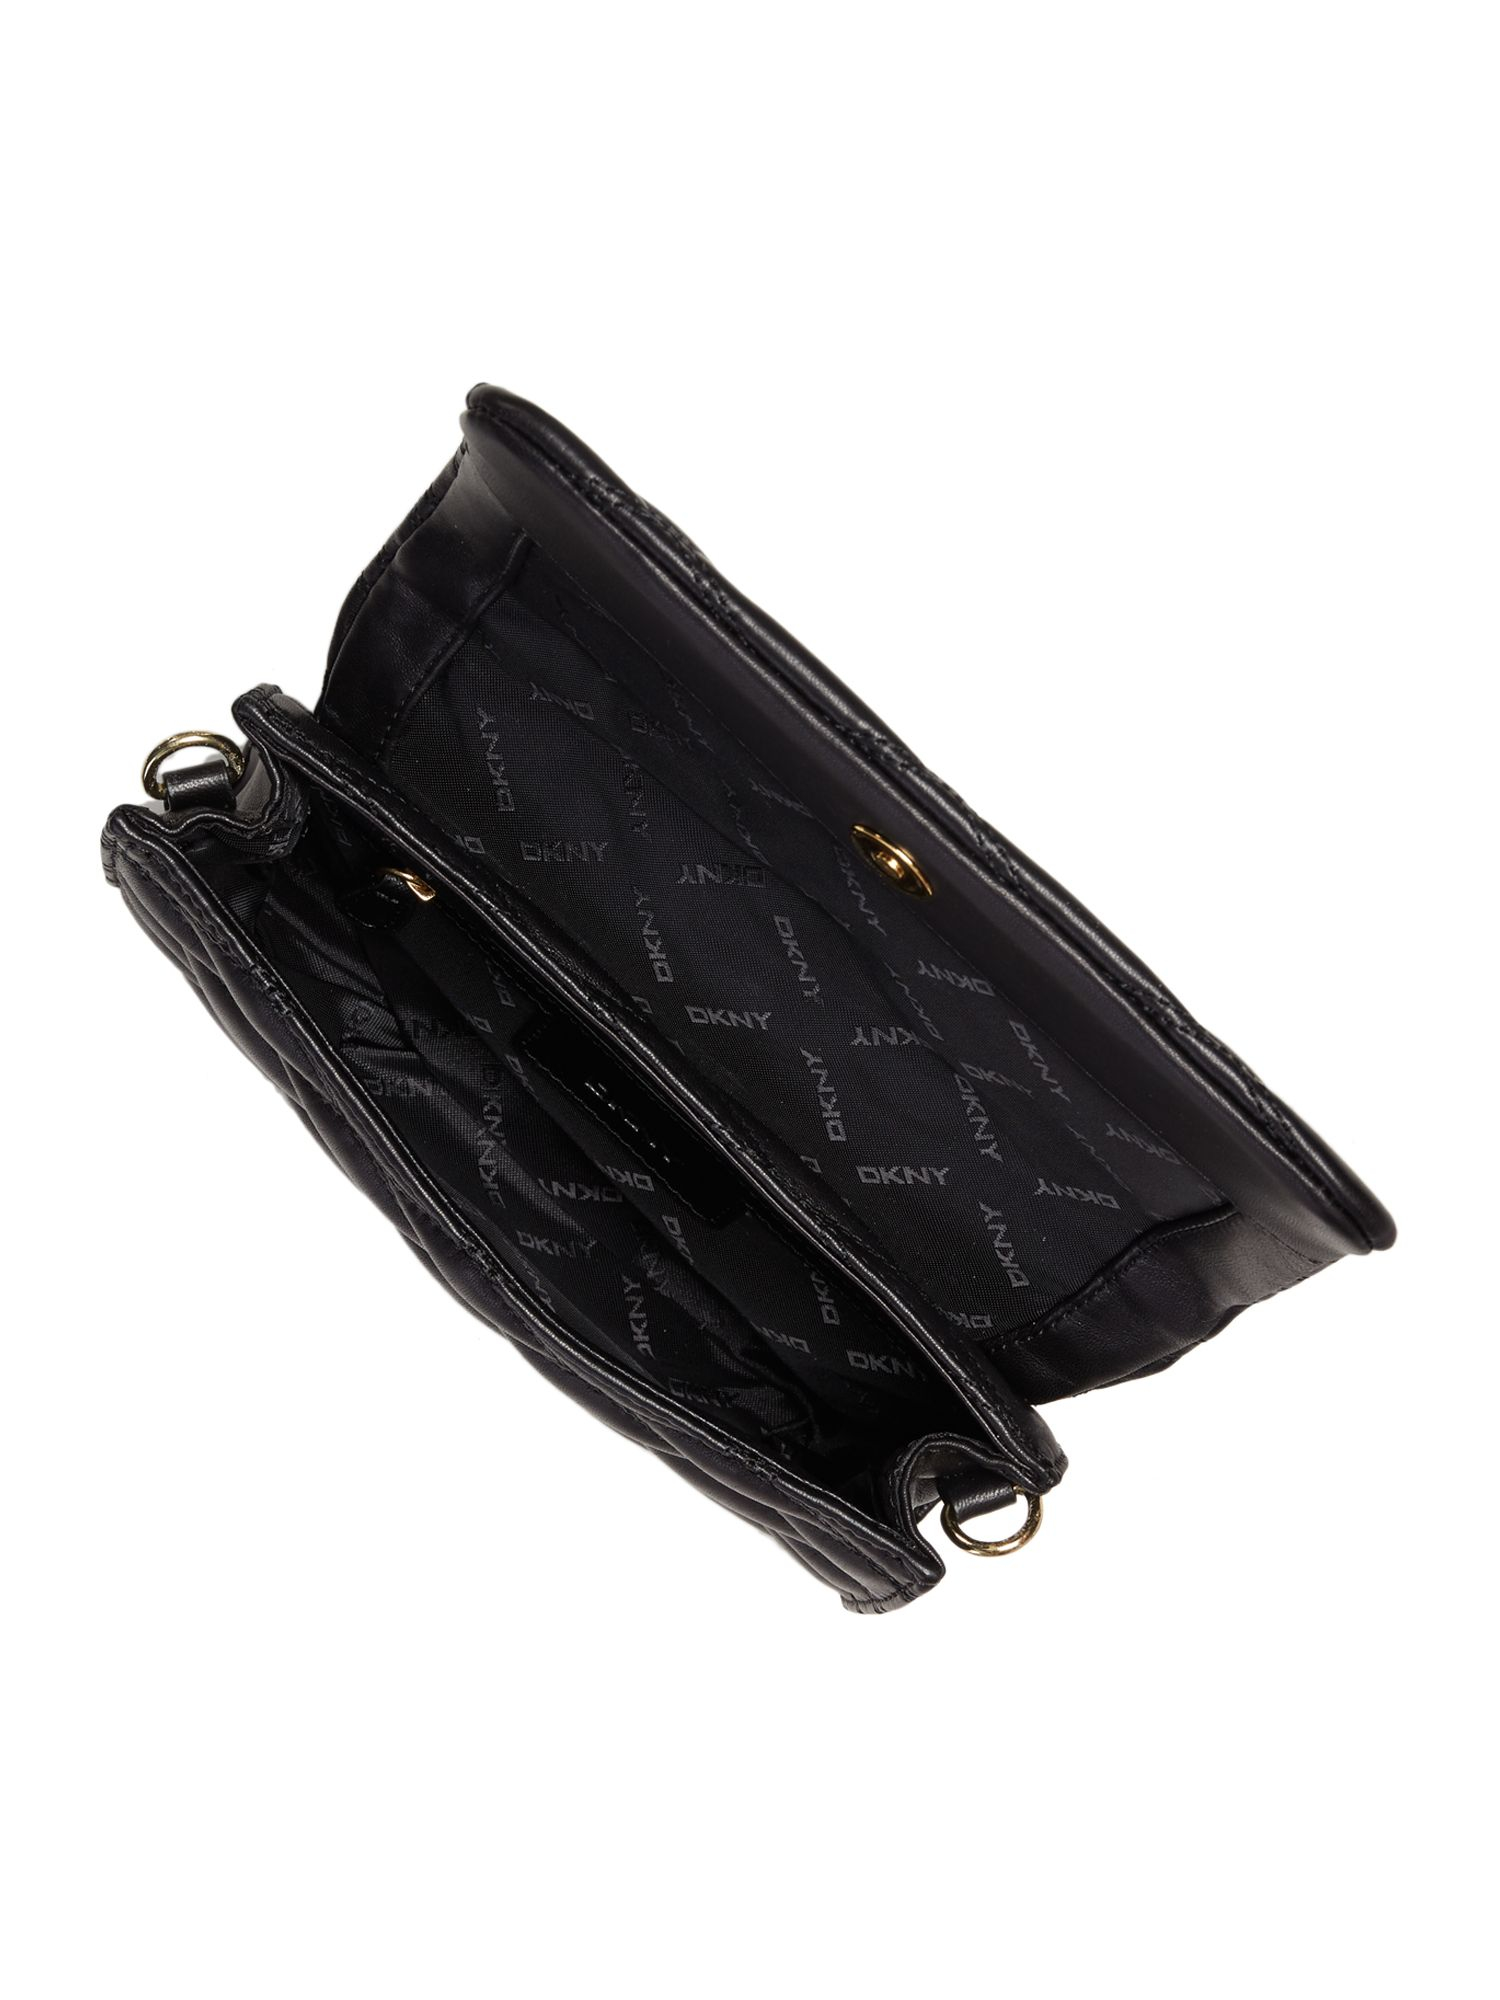 DKNY Leather Quilted Black Small Flap Over Cross Body Bag - Lyst